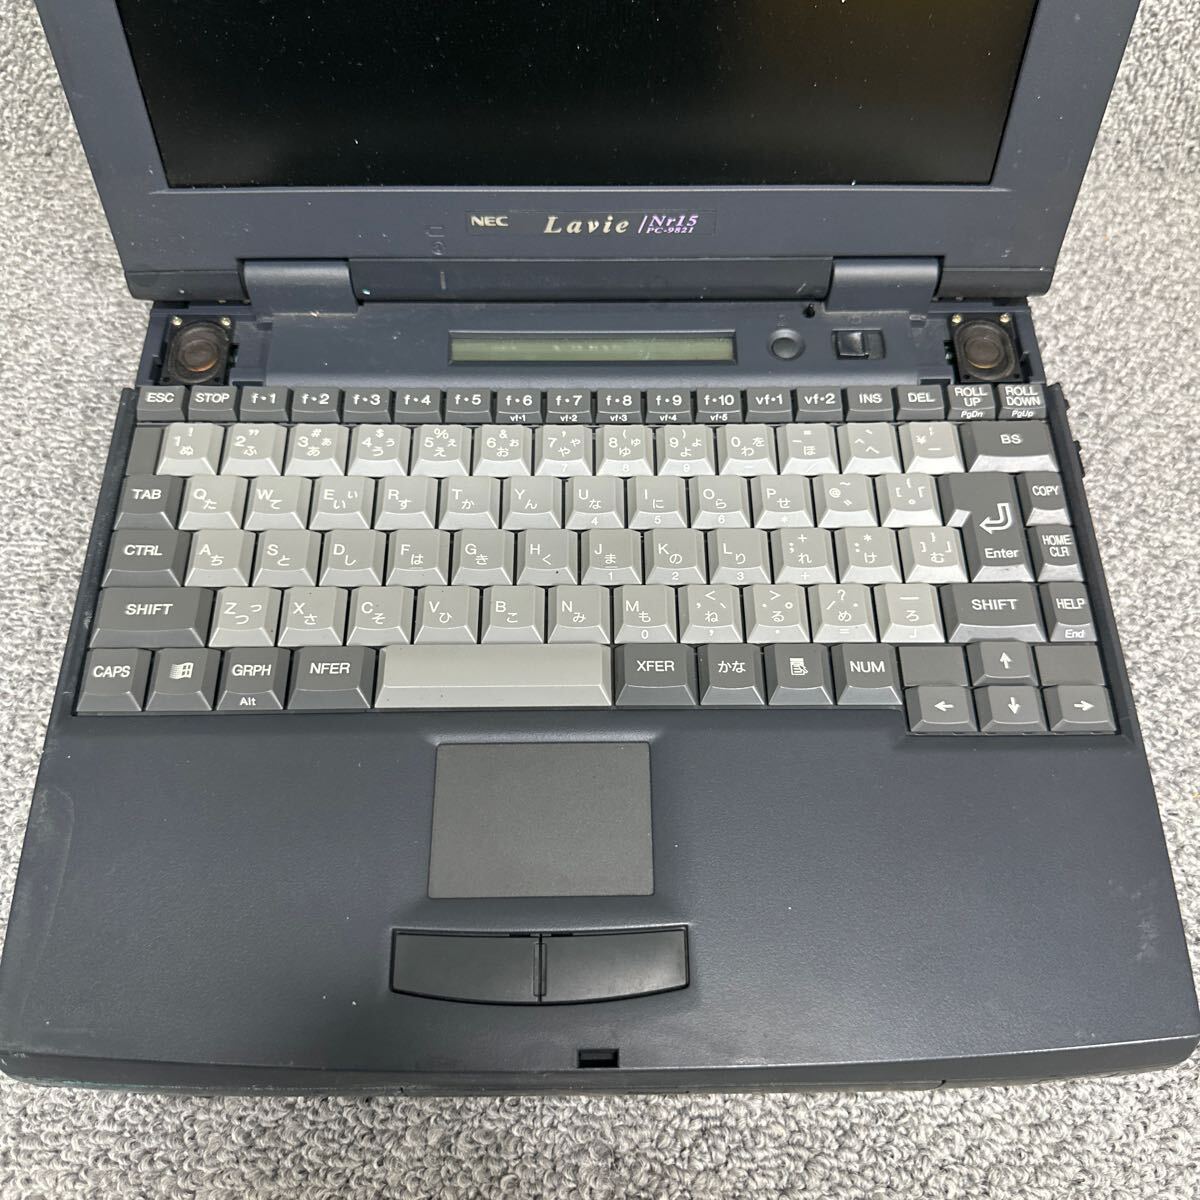 PCN98-1641 super-discount PC98 notebook NEC Lavie PC-9821Nr15 electrification un- possible Junk including in a package possibility 